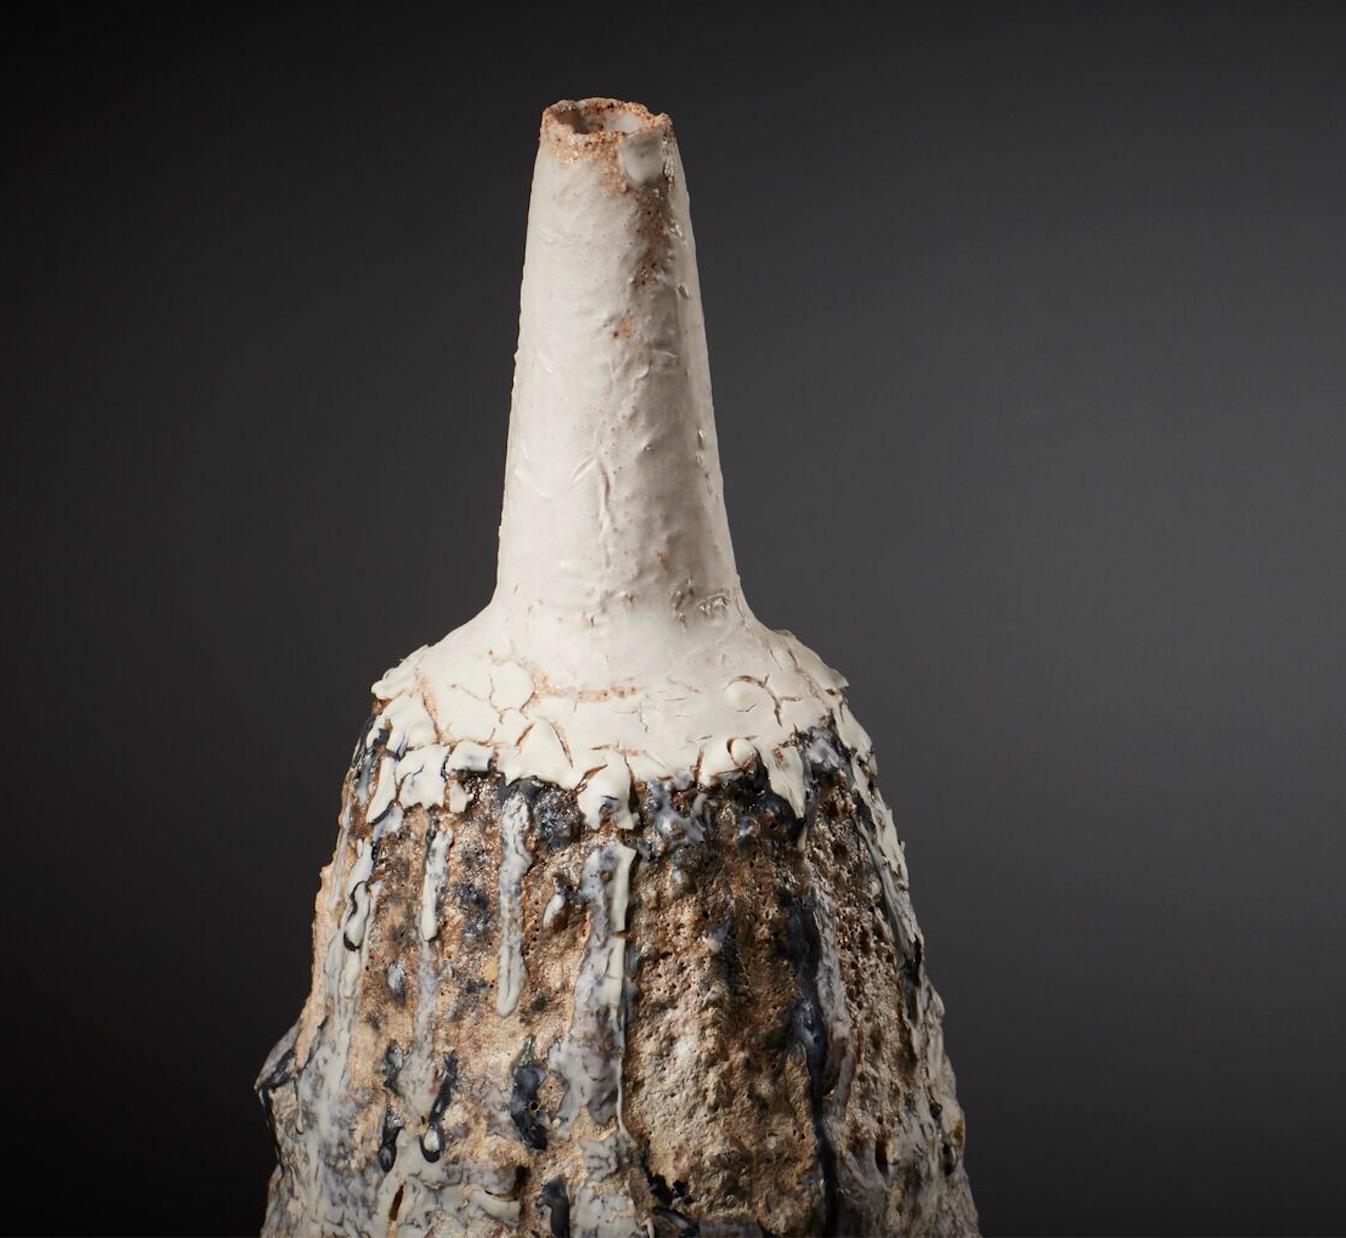 This sculpted Bottleis a decorative ceramic piece with a volcanic glaze and iron spangles, crafted by ceramicist Alison Lousada. Alison's raw yet elegant vessels are inspired by her love of Japanese and African ceramics, Icelandic landscapes and